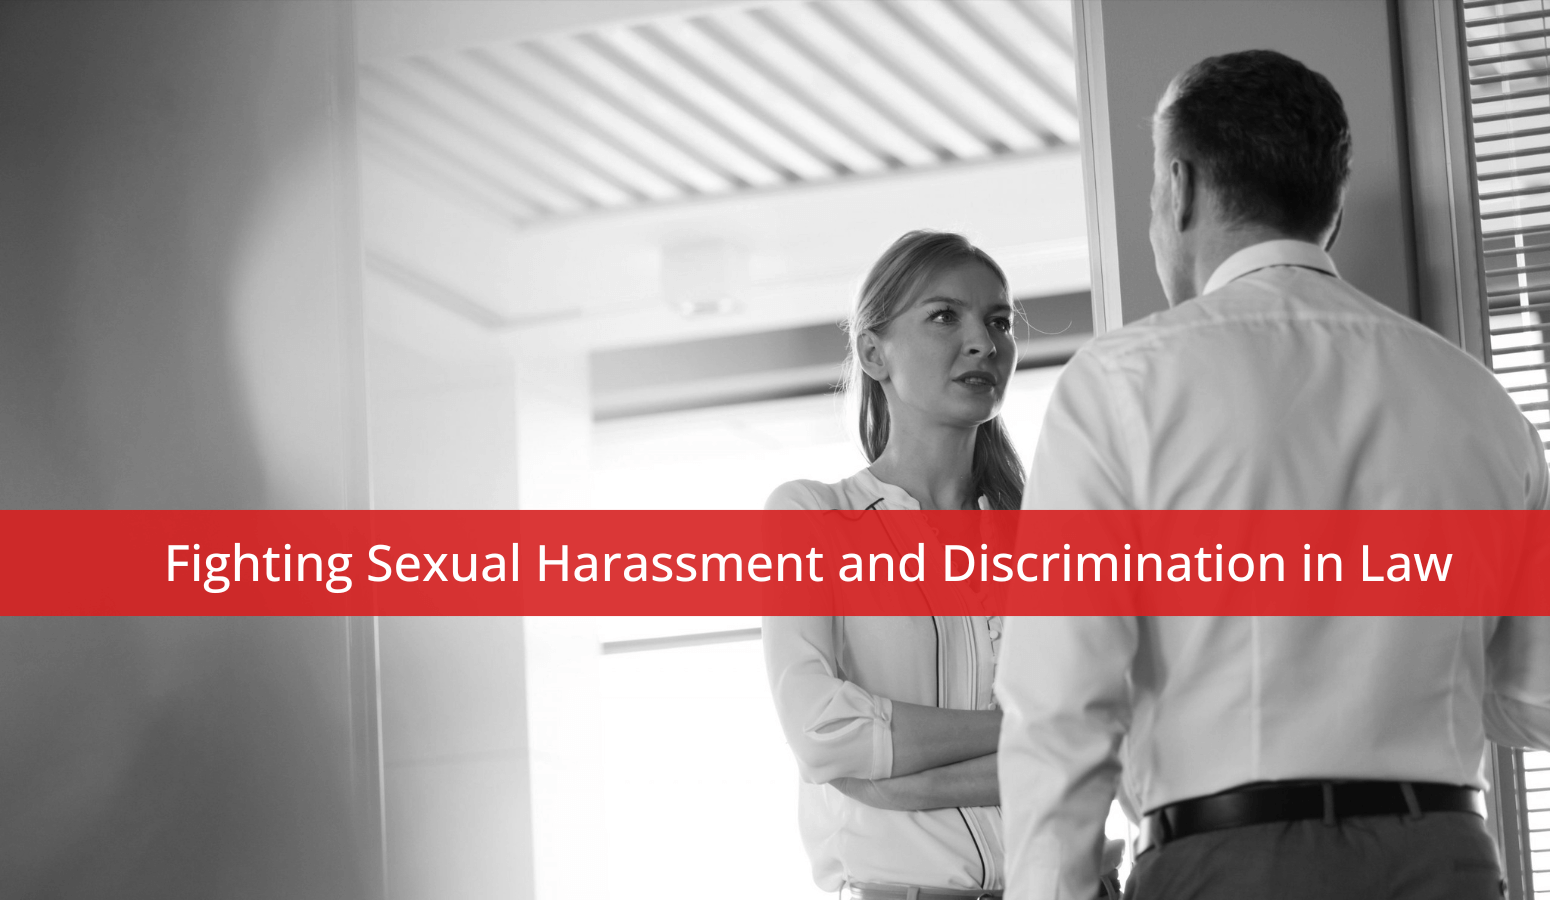 Featured image for “Fighting Sexual Harassment and Discrimination in Law”